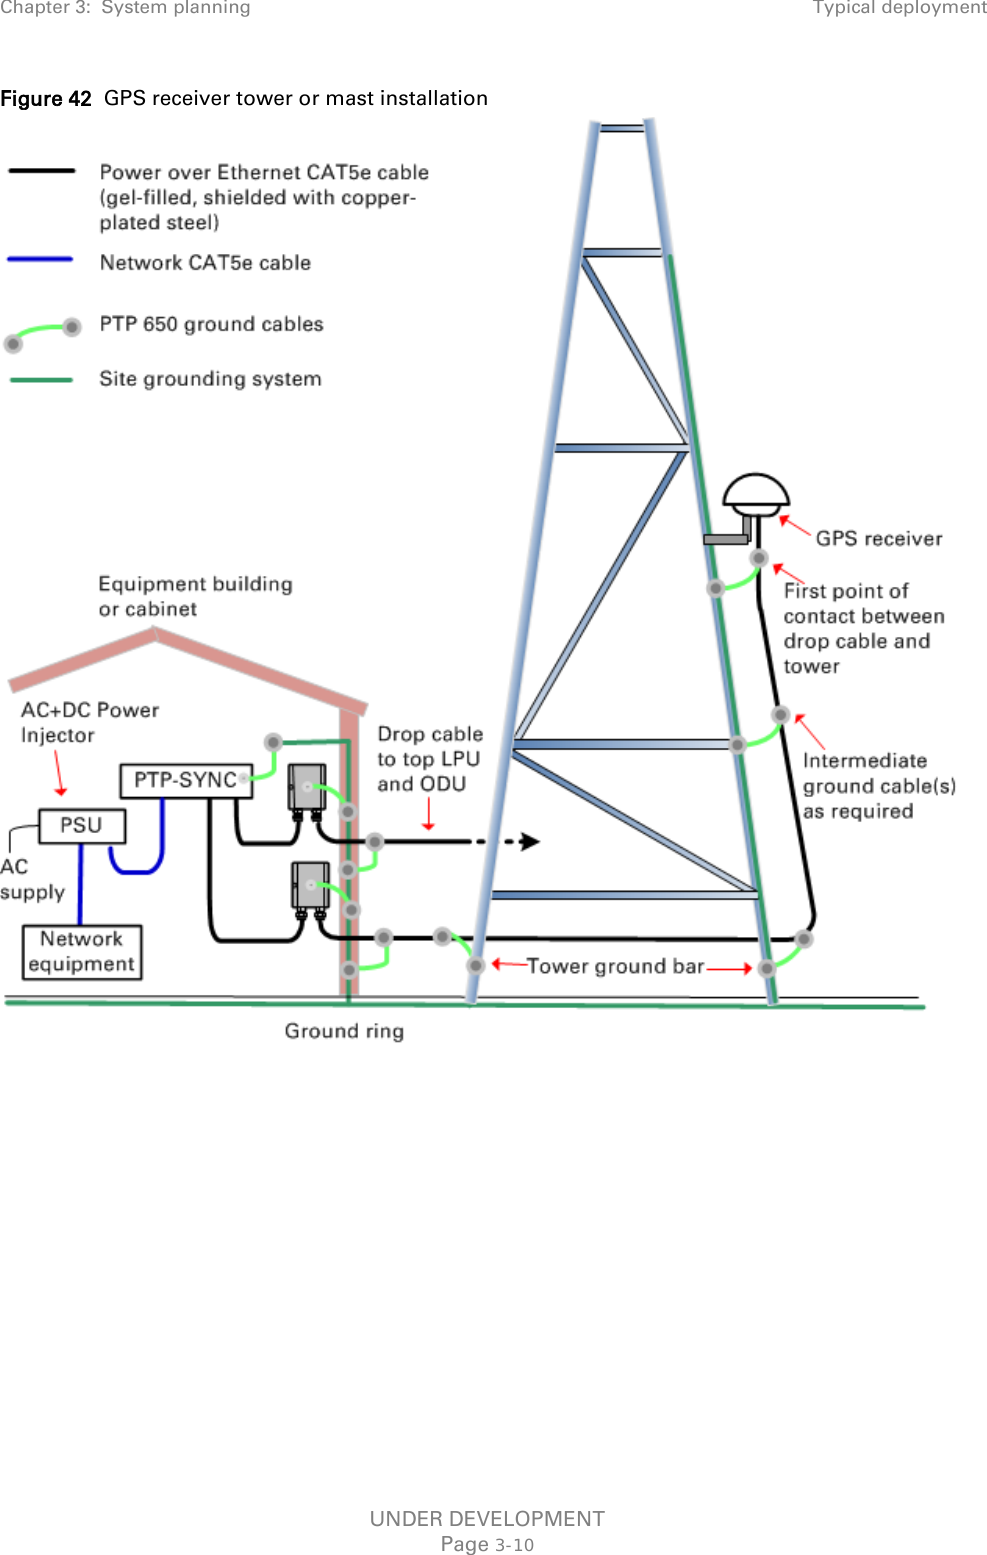 Chapter 3:  System planning Typical deployment  Figure 42  GPS receiver tower or mast installation    UNDER DEVELOPMENT Page 3-10 